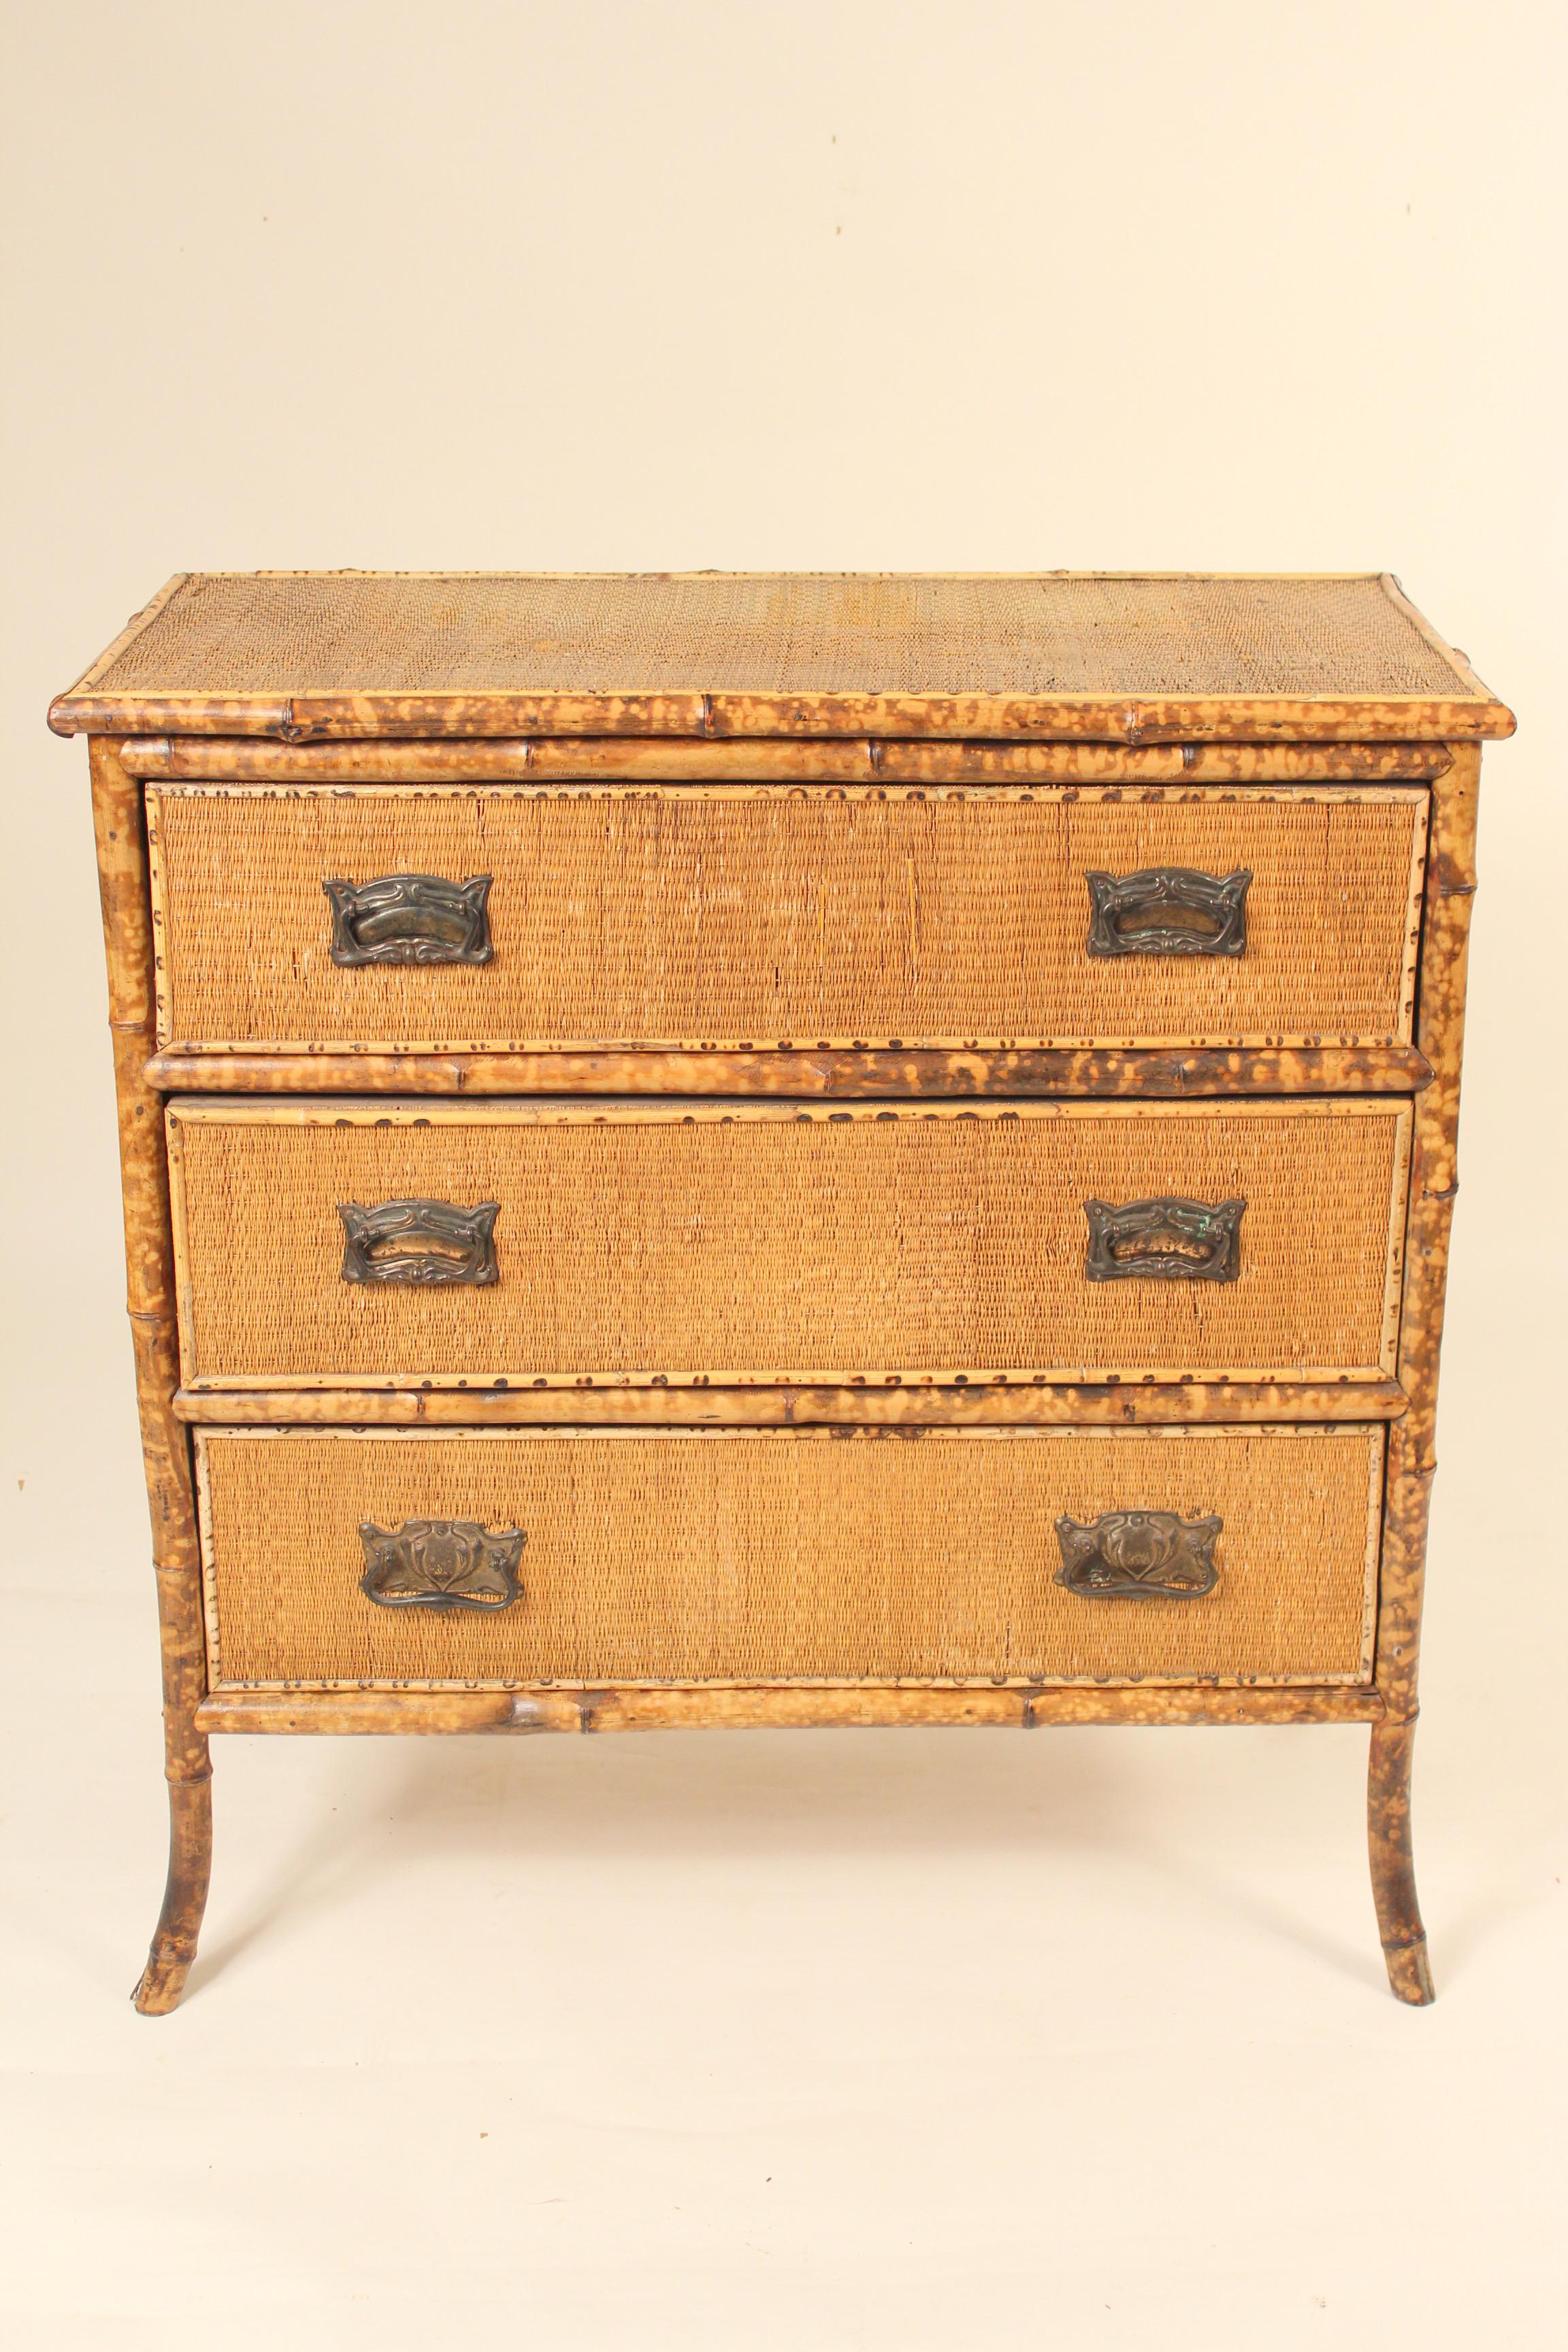 Bamboo and rattan chest of drawers with brass hardware, circa 1920s.